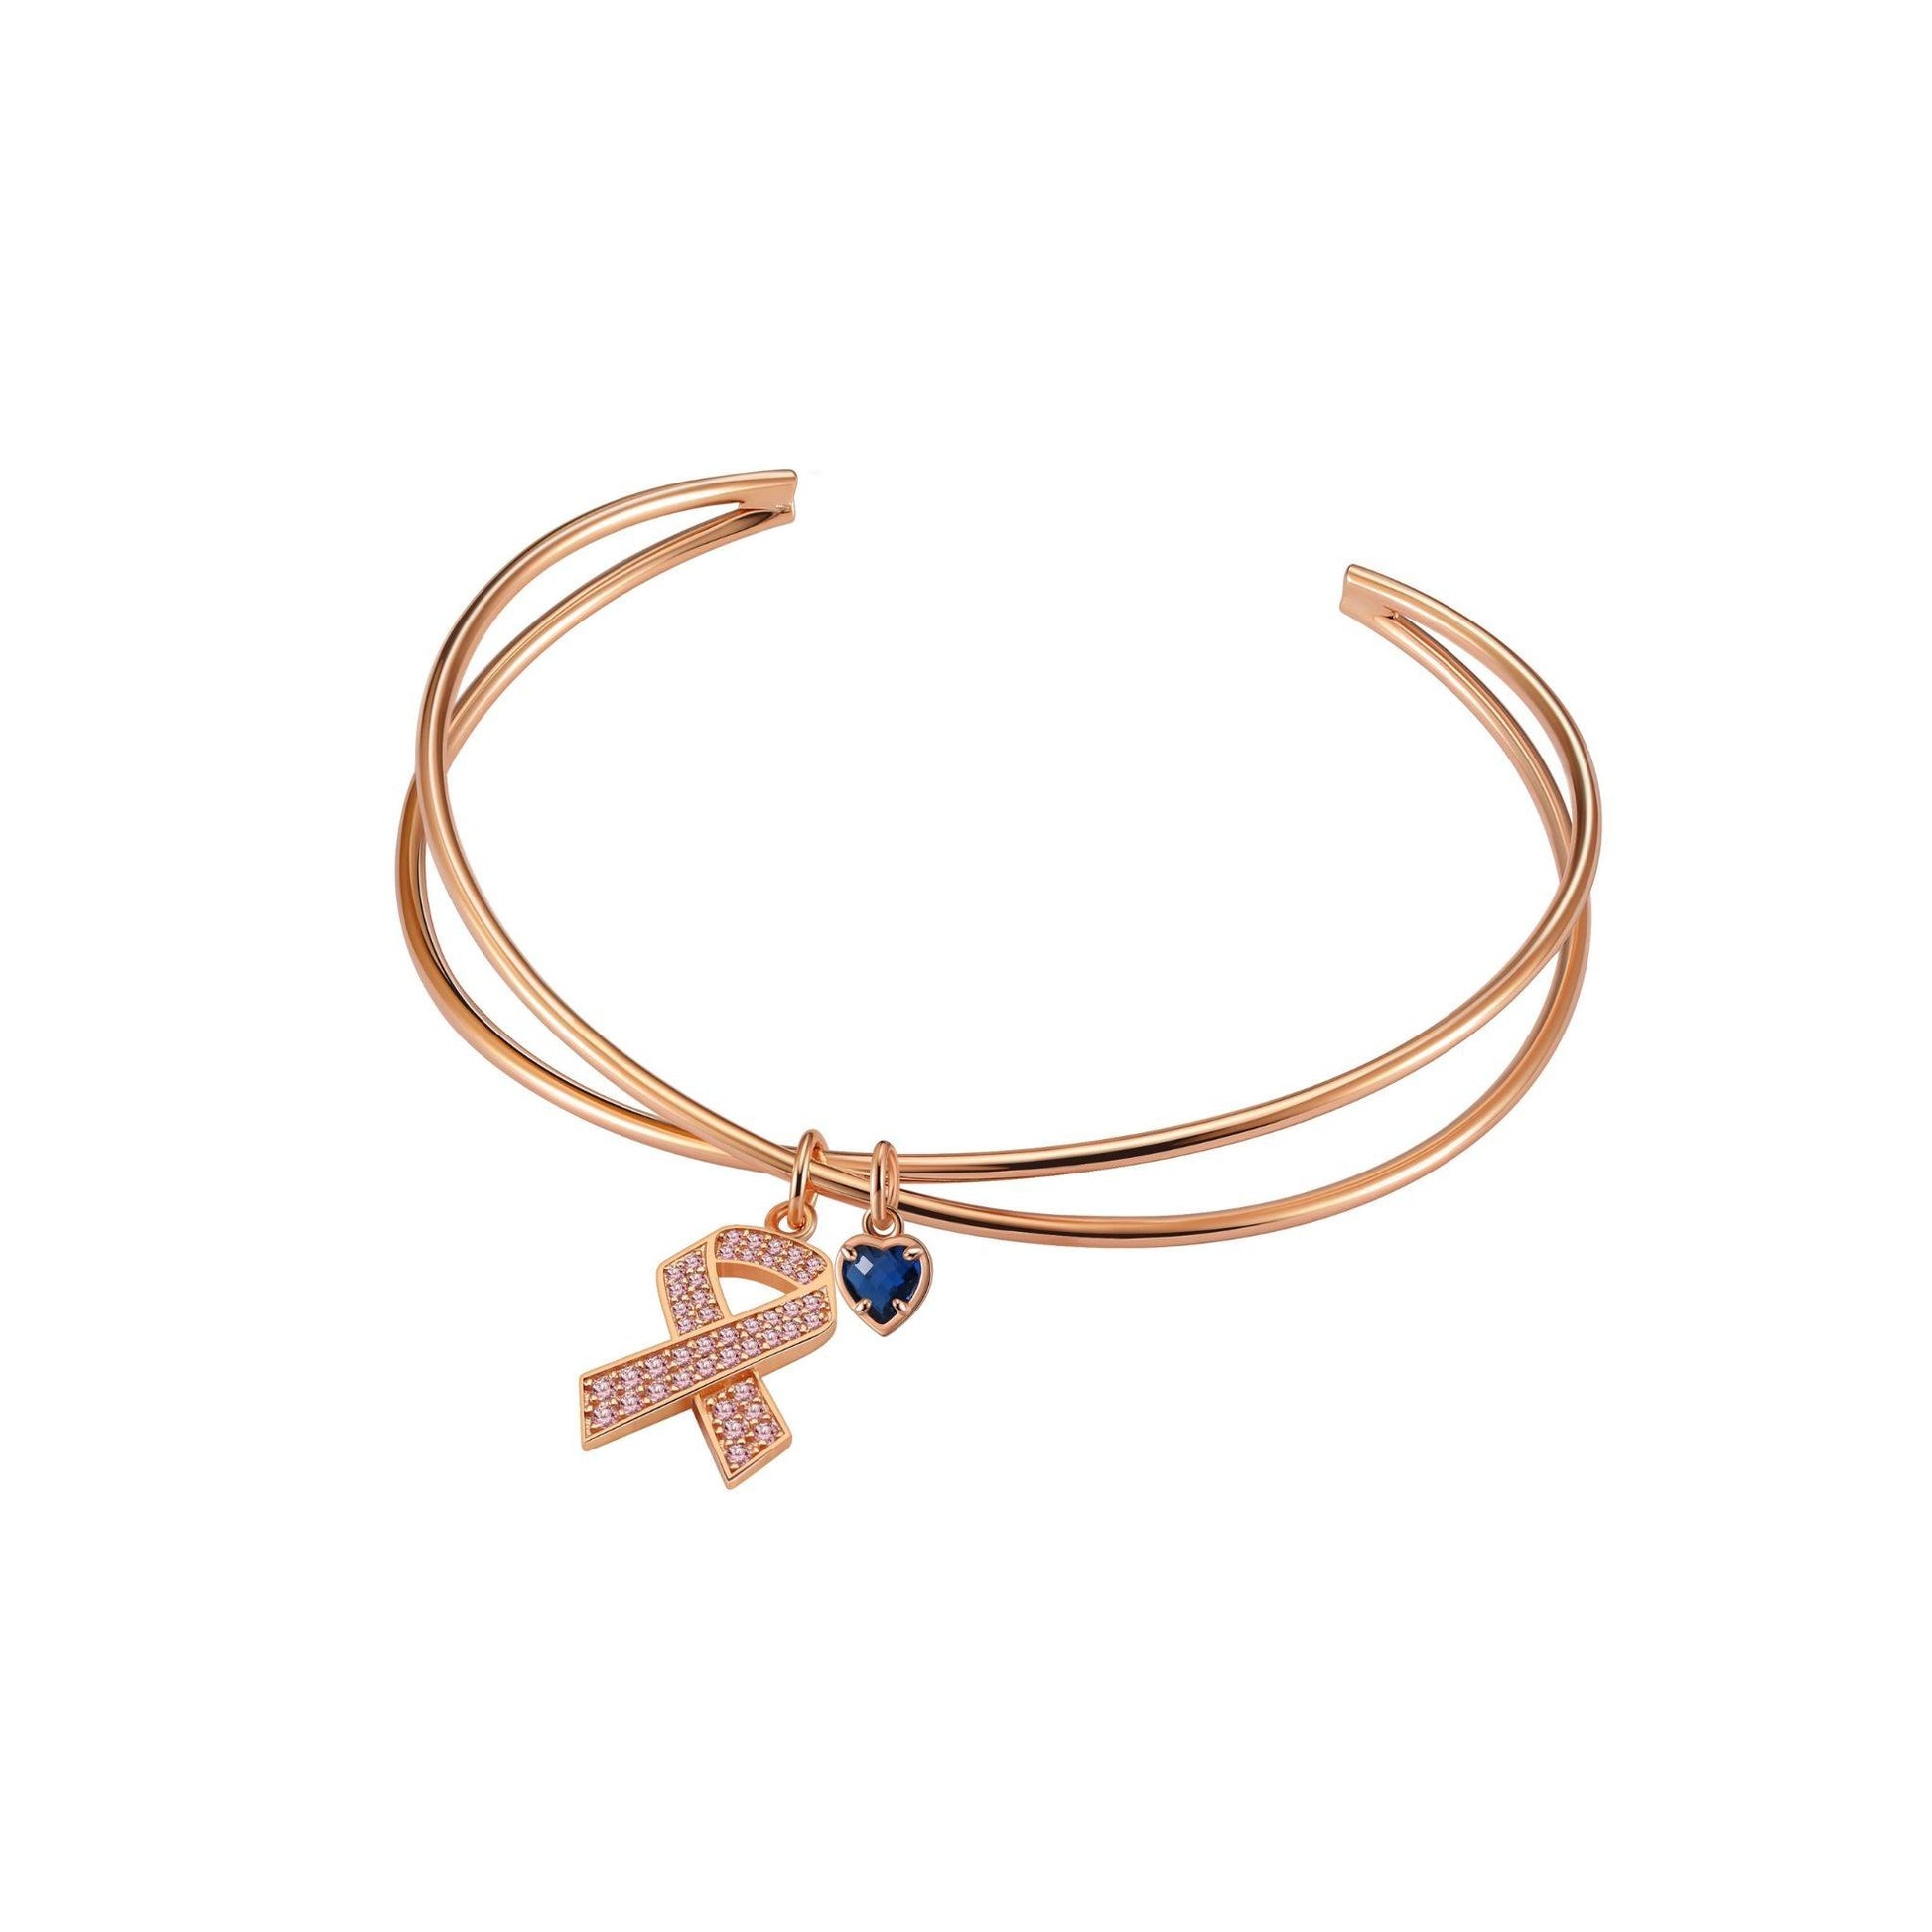 Pink Ribbon Bracelet - Limited Edition - Findings & Connections